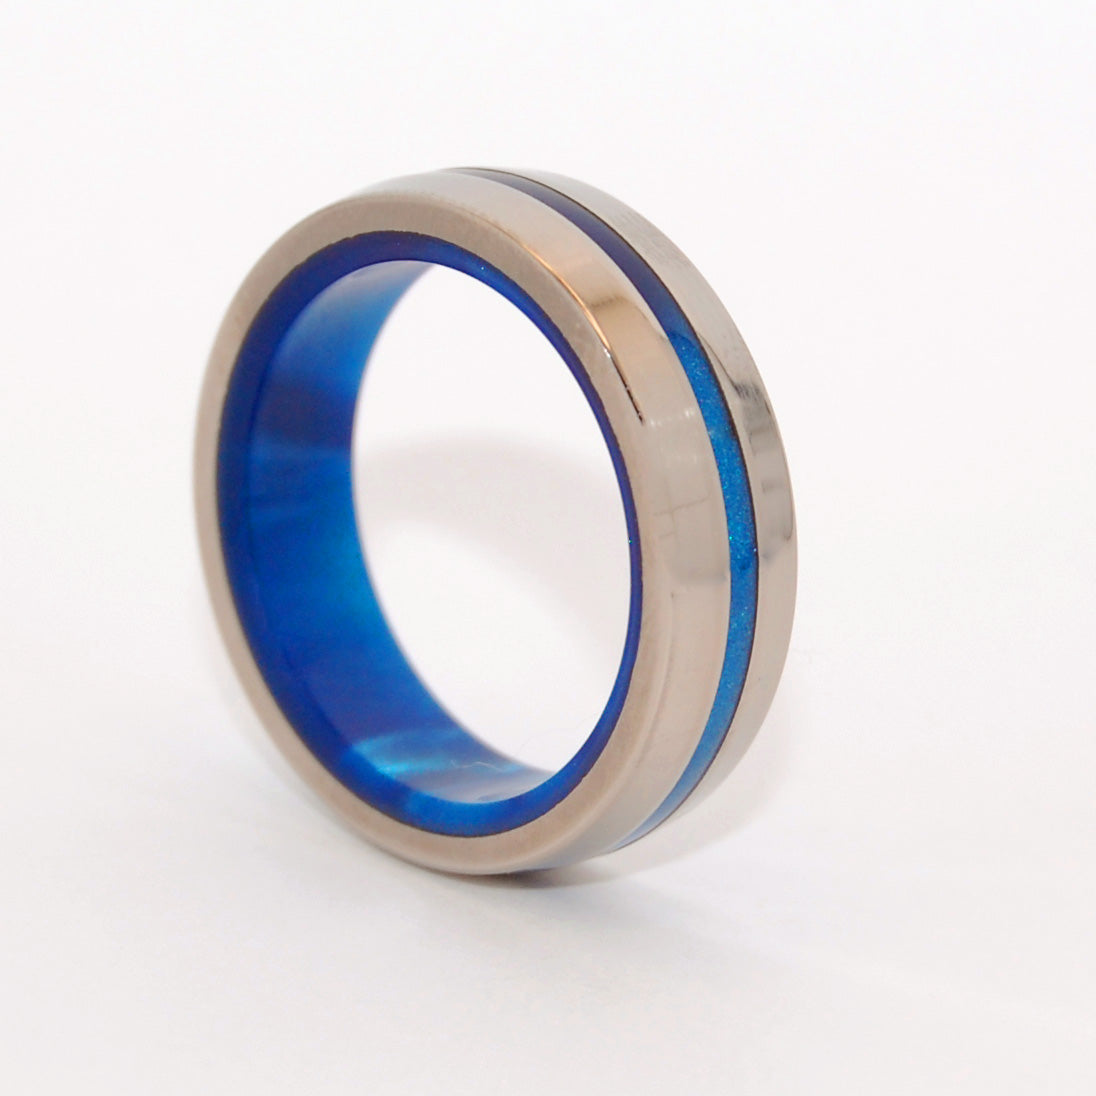 DOUBLY INSPIRED BY BLUE | Blue Marbled Opalescent Resin & Titanium Wedding Rings - Minter and Richter Designs